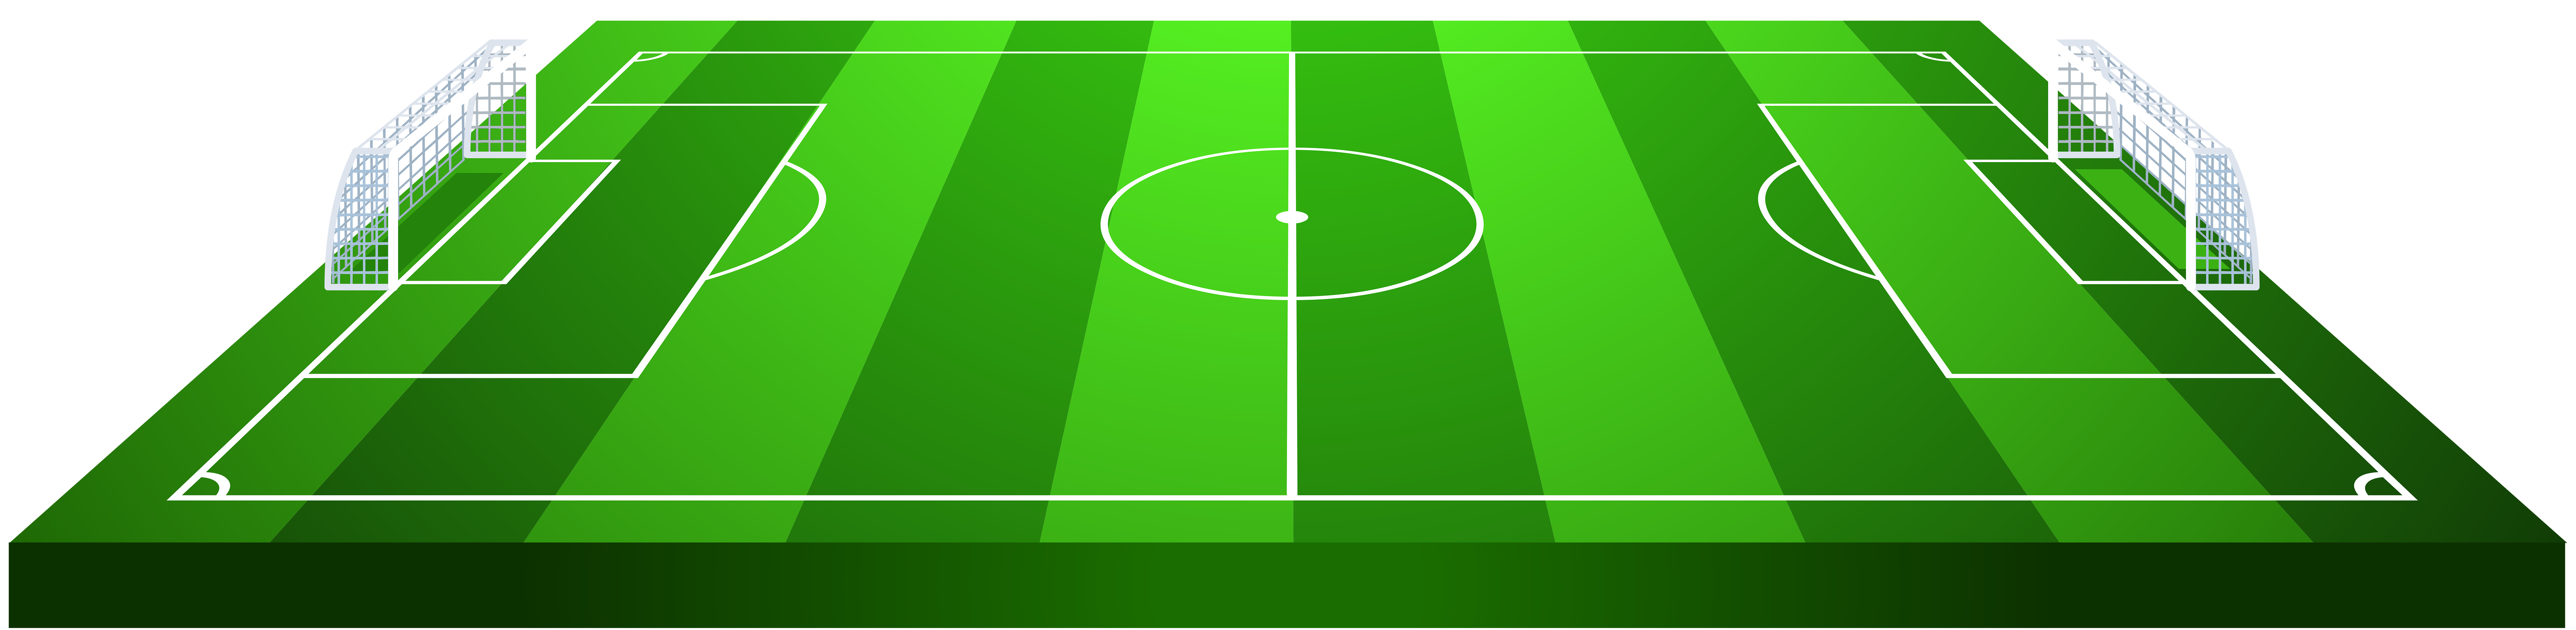 Soccer Field PNG Transparent Clip Art Image | Gallery Yopriceville - High-Quality ...8000 x 1957